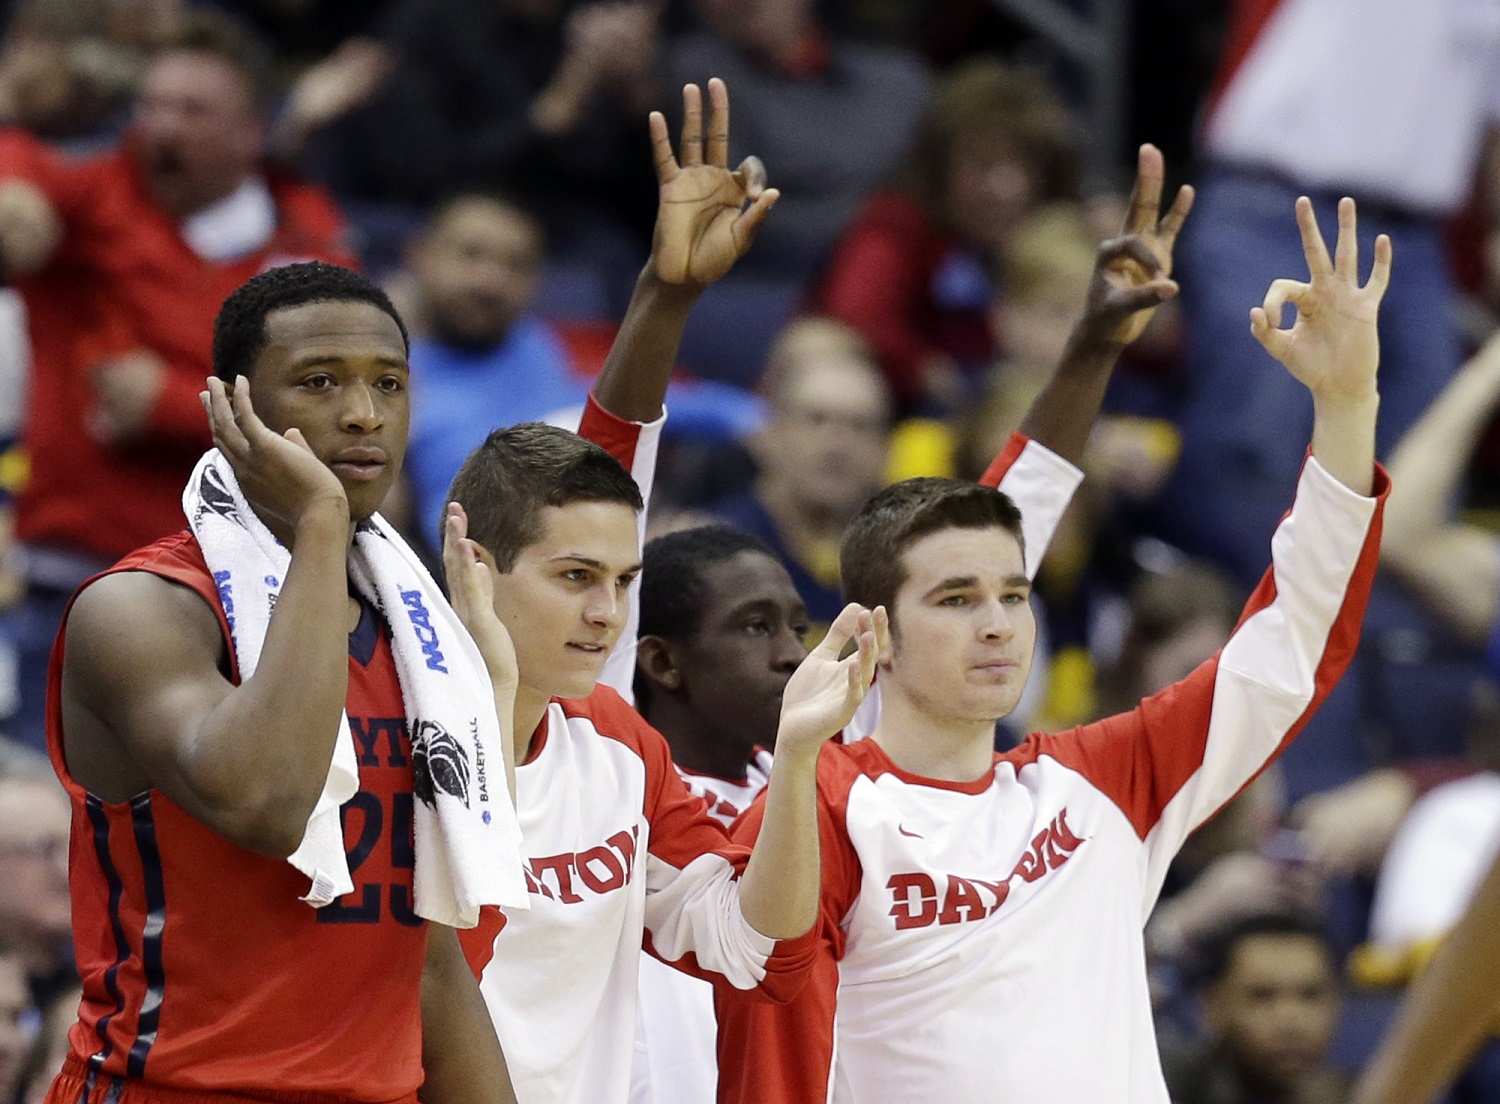 The Dayton bench celebrates a 3-point basket in the first half of an NCAA tournament college basketball game against Oklahoma in the Round of 32 in Columbus, Ohio, Sunday, March 22, 2015. (AP Photo/Tony Dejak)